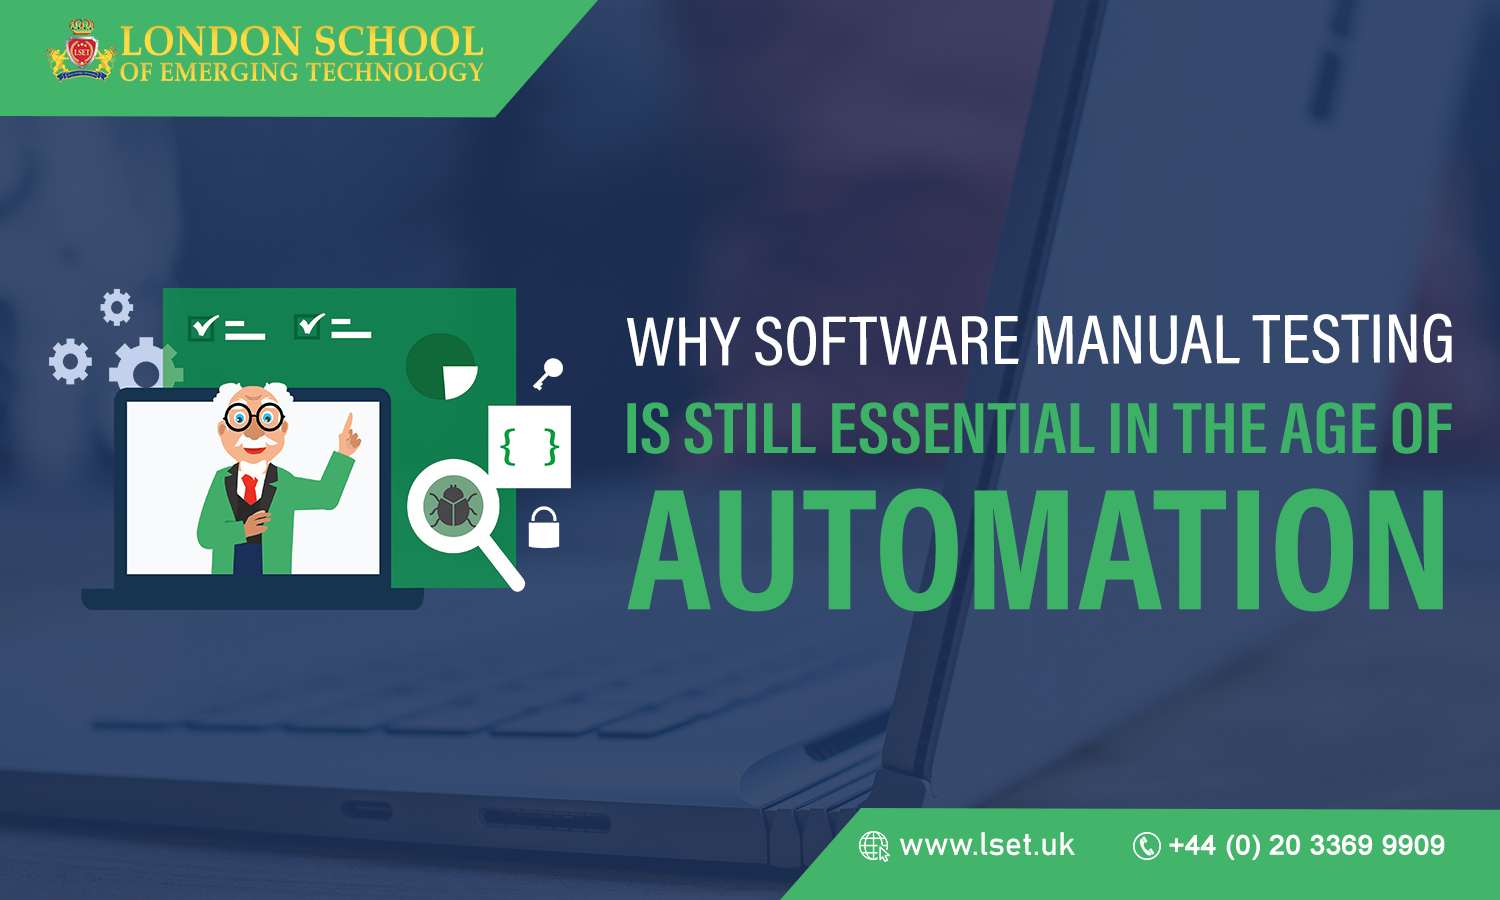 Why Software Manual Testing is Still Essential in the Age of Automation